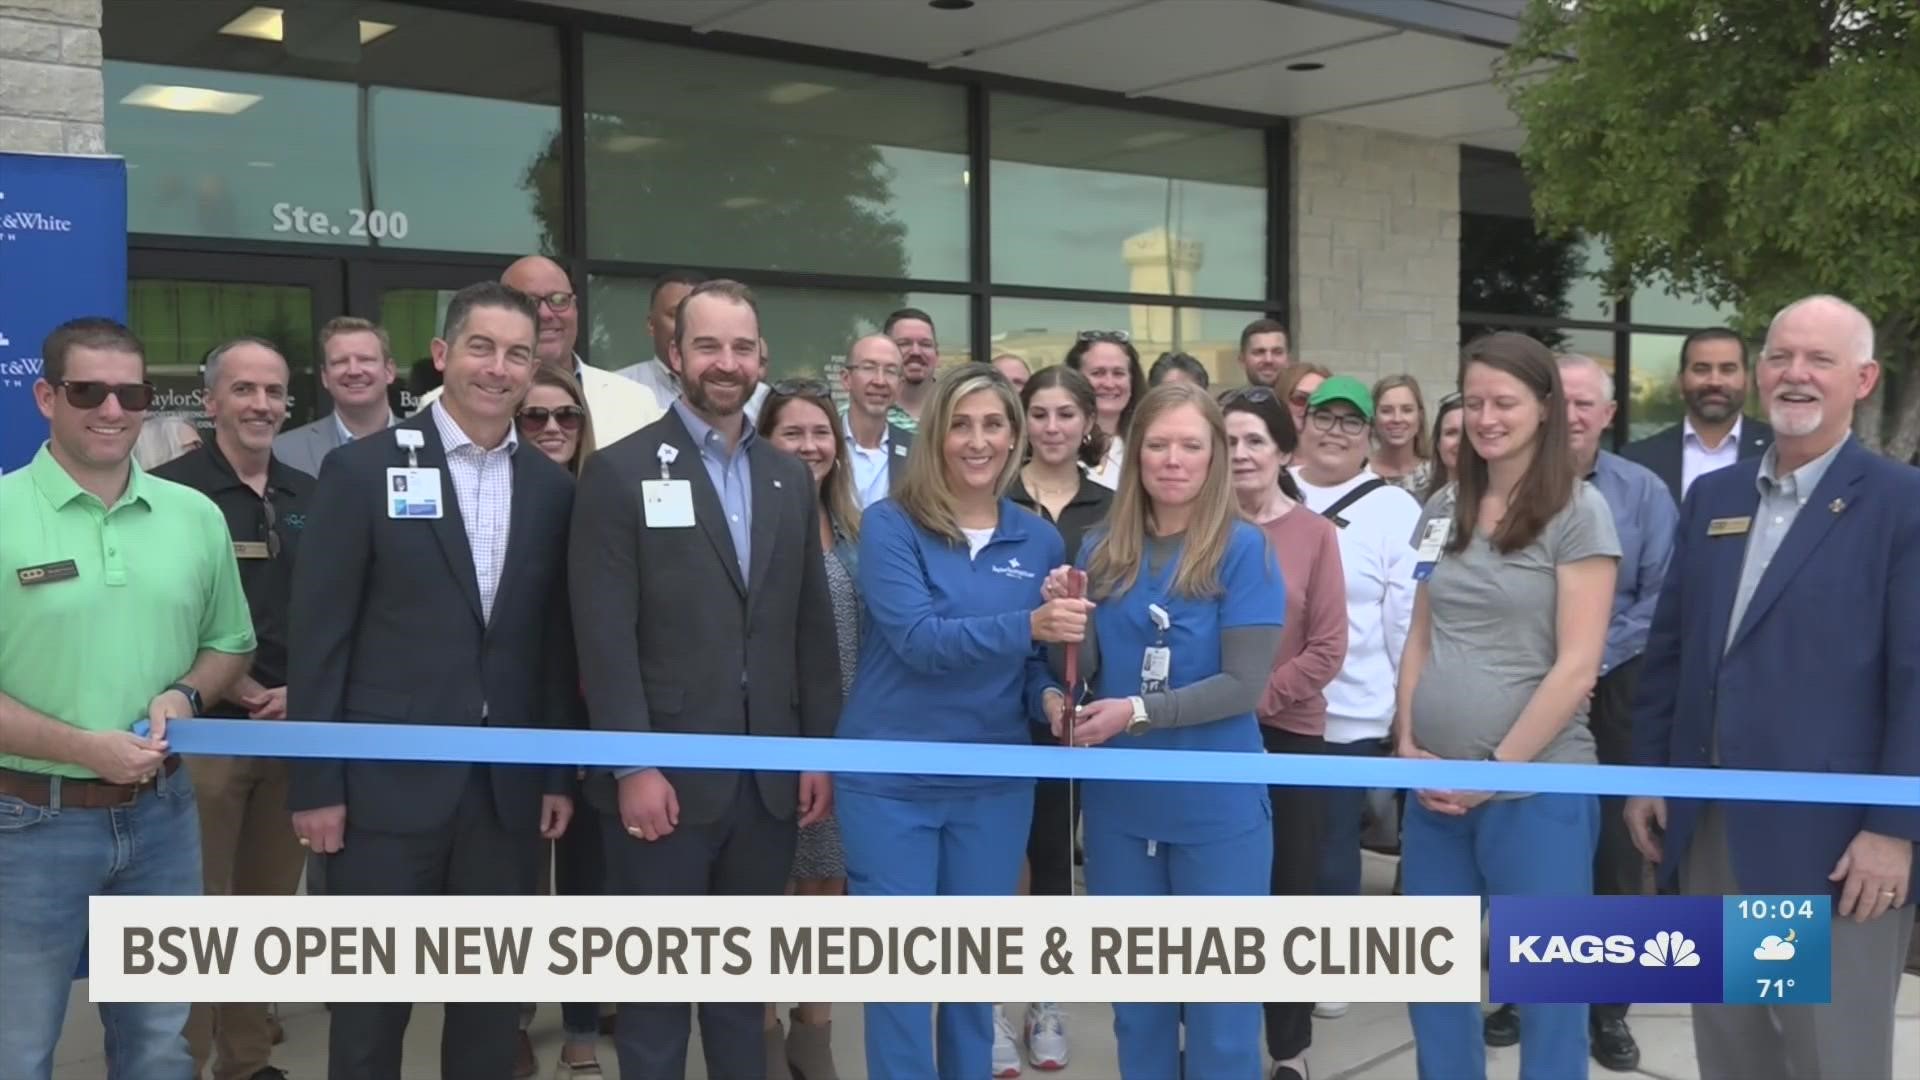 The new $1.3 million sports therapy and rehabilitation clinic had its ribbon cutting ceremony on Wednesday, Nov. 9 to celebrate the opening of the new location.